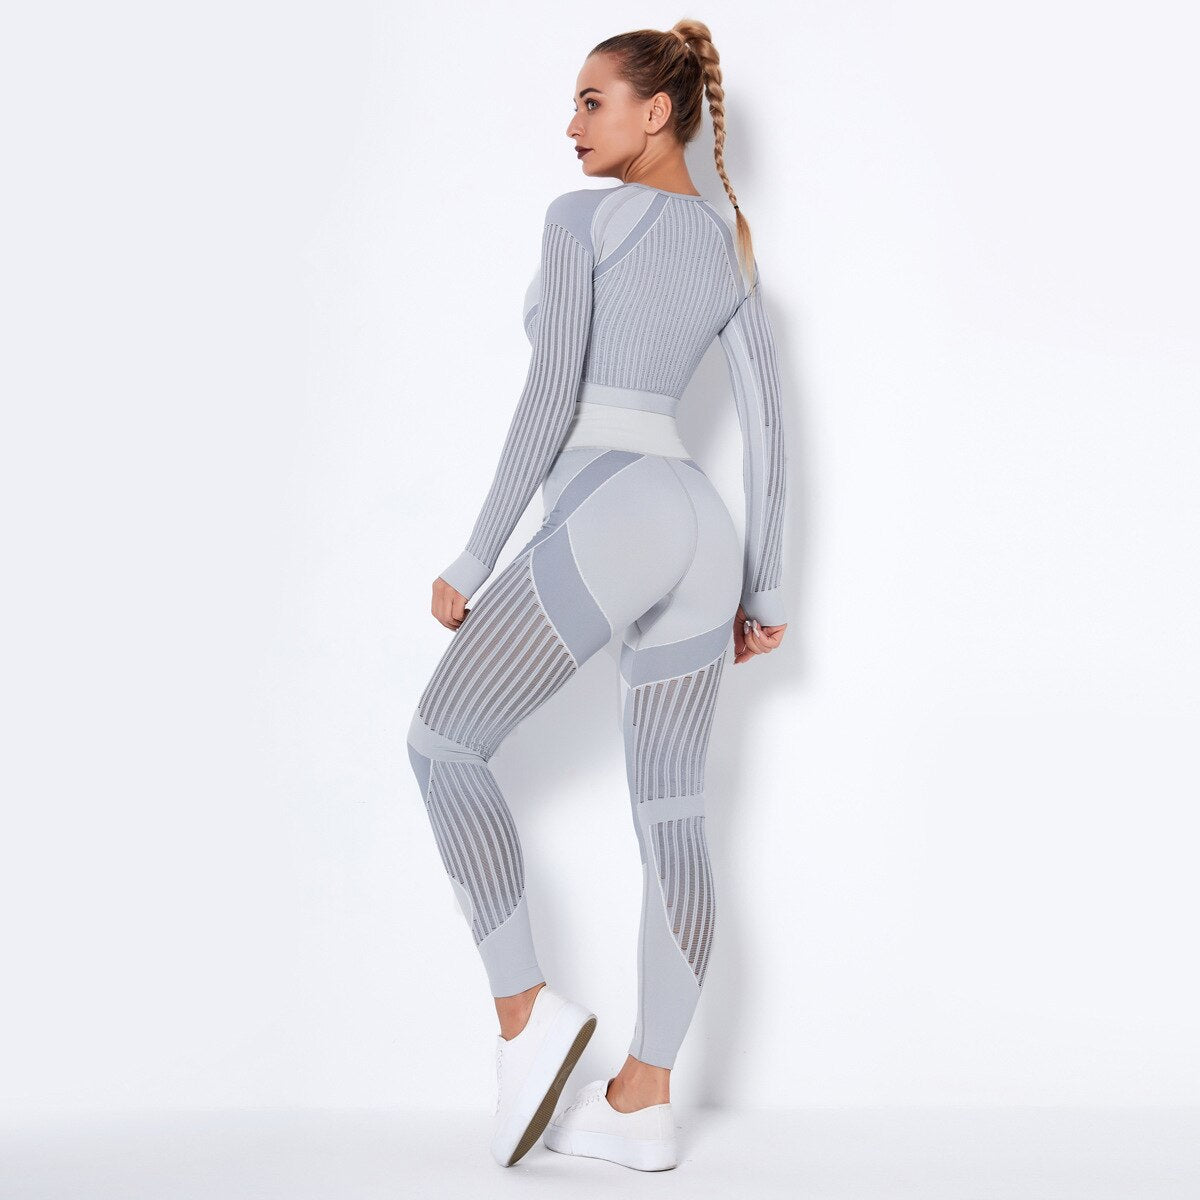 Seamless Gym Set Women Sexy Patchwork Mesh 2 Piece Yoga Set Fitness Long Sleeve Crop Top Sports Leggings Outfits Workout Clothes